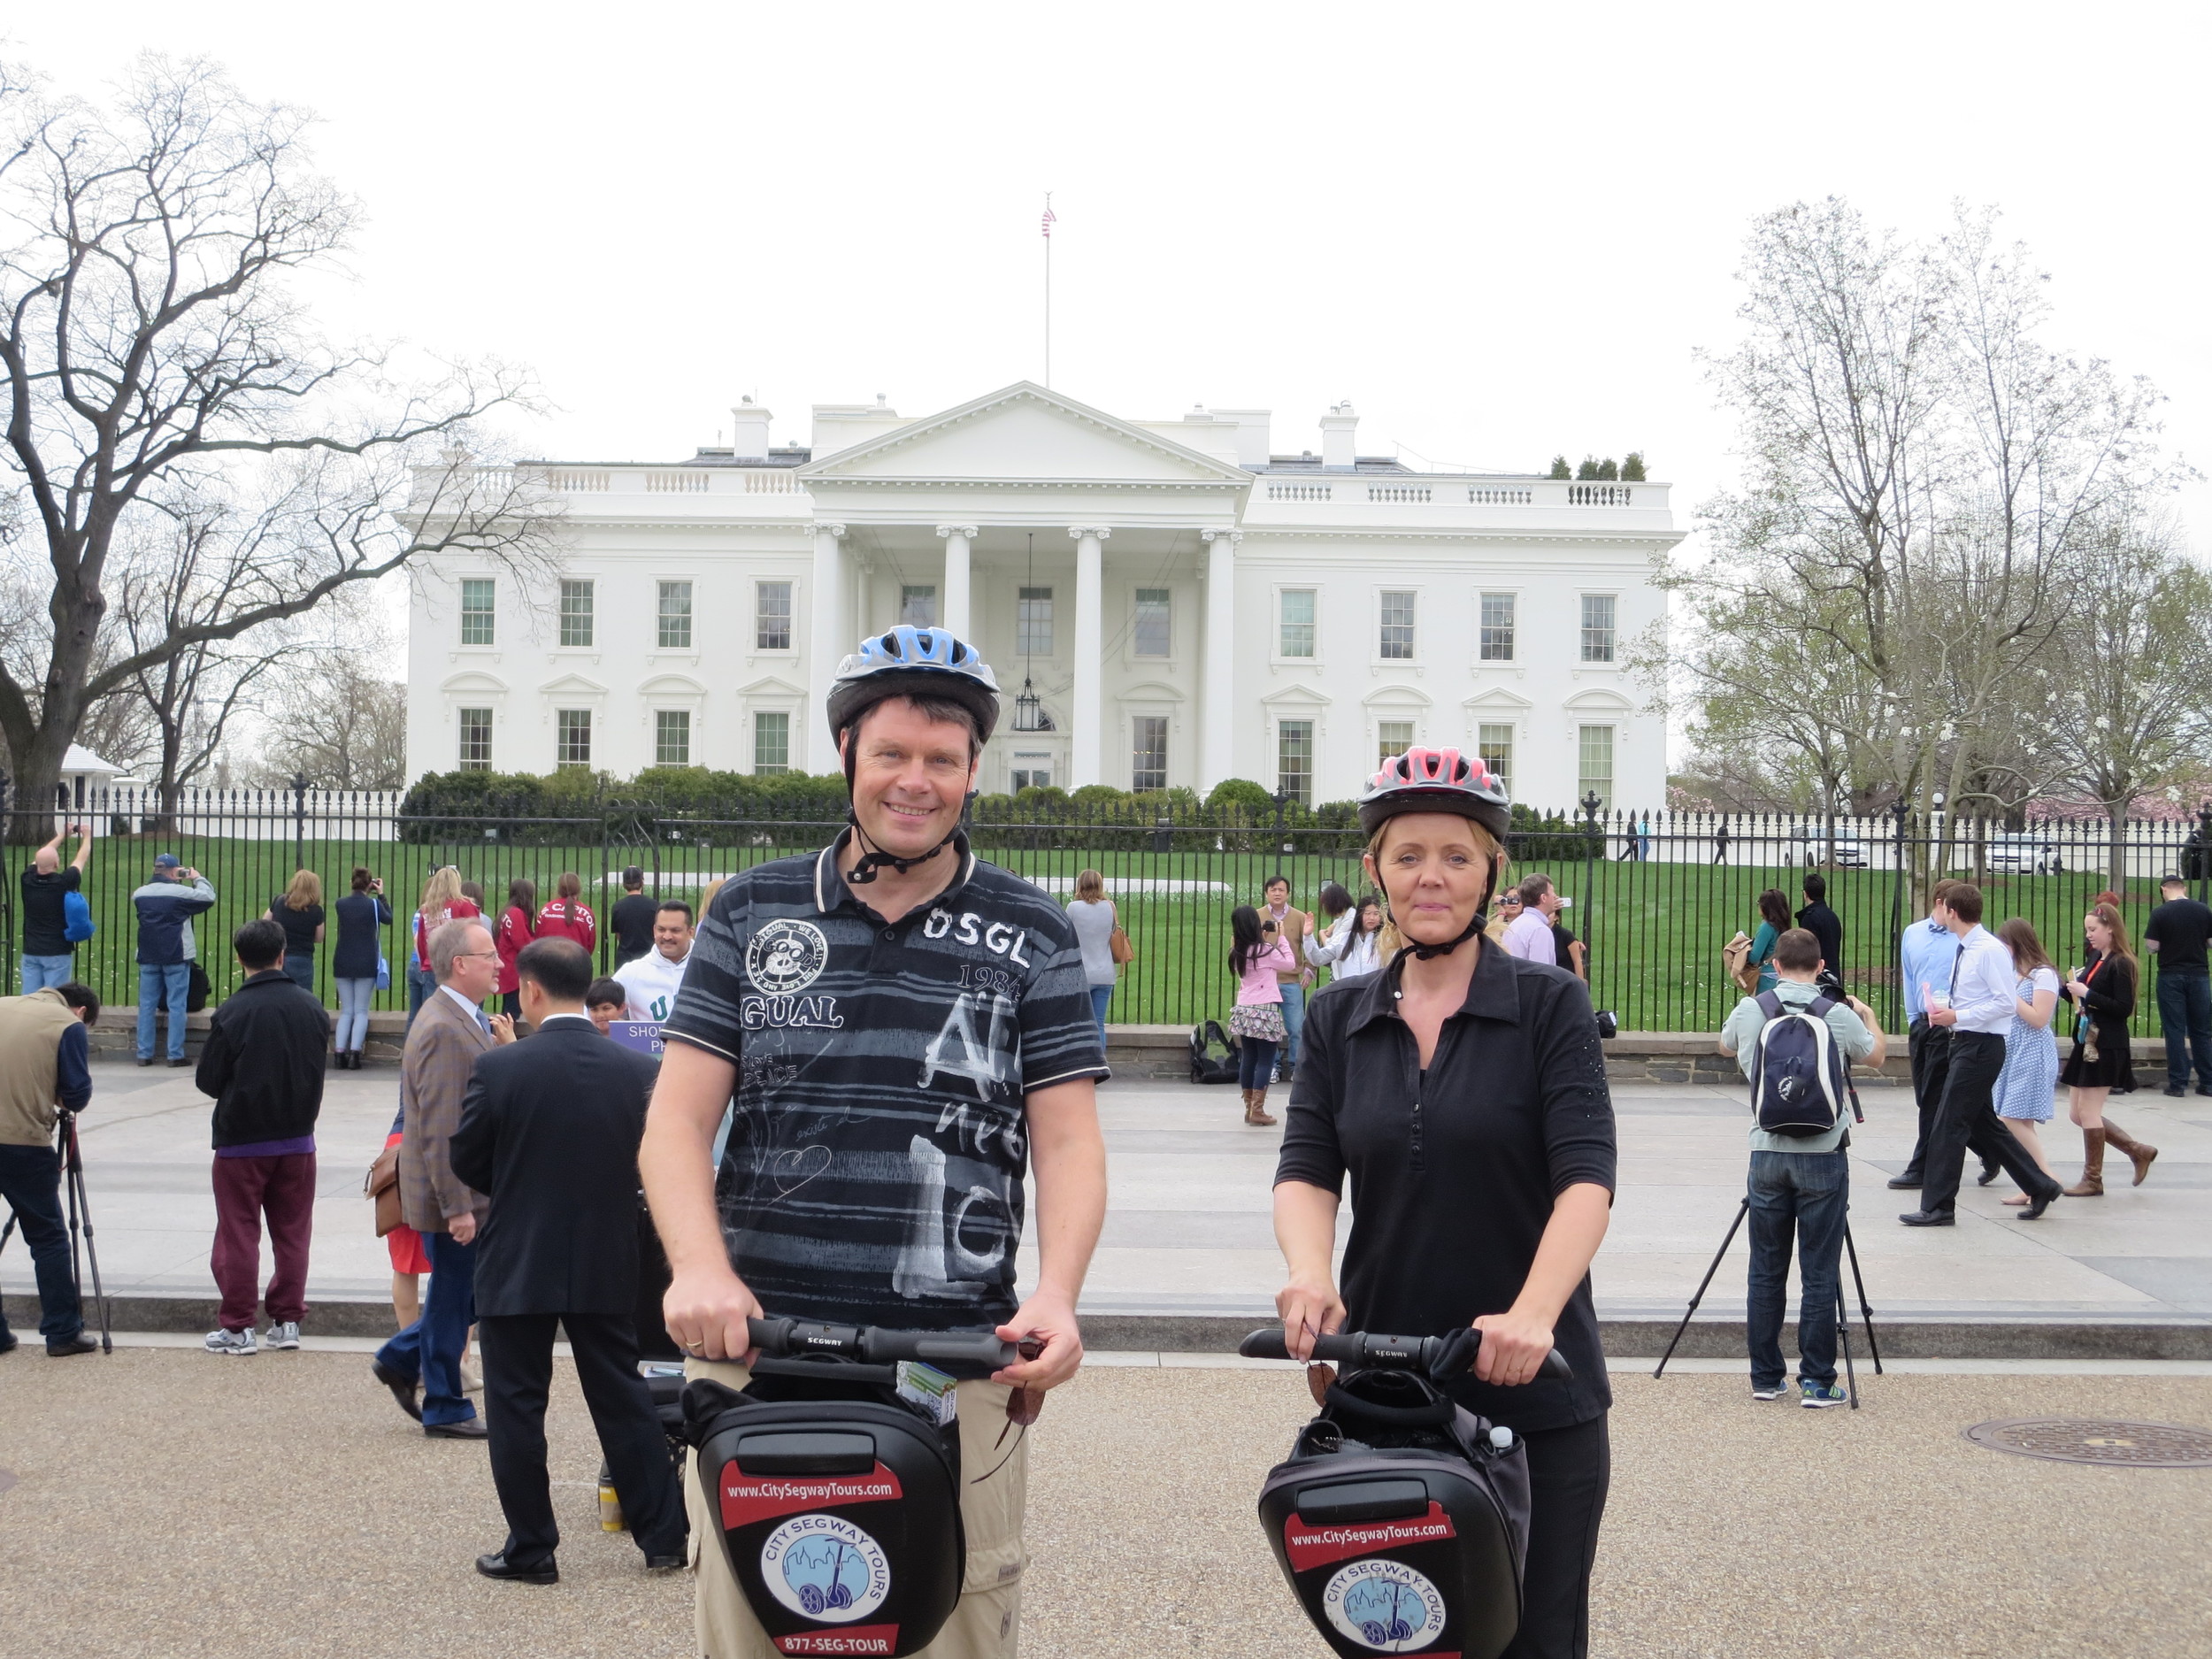 On Segways in front of The White House